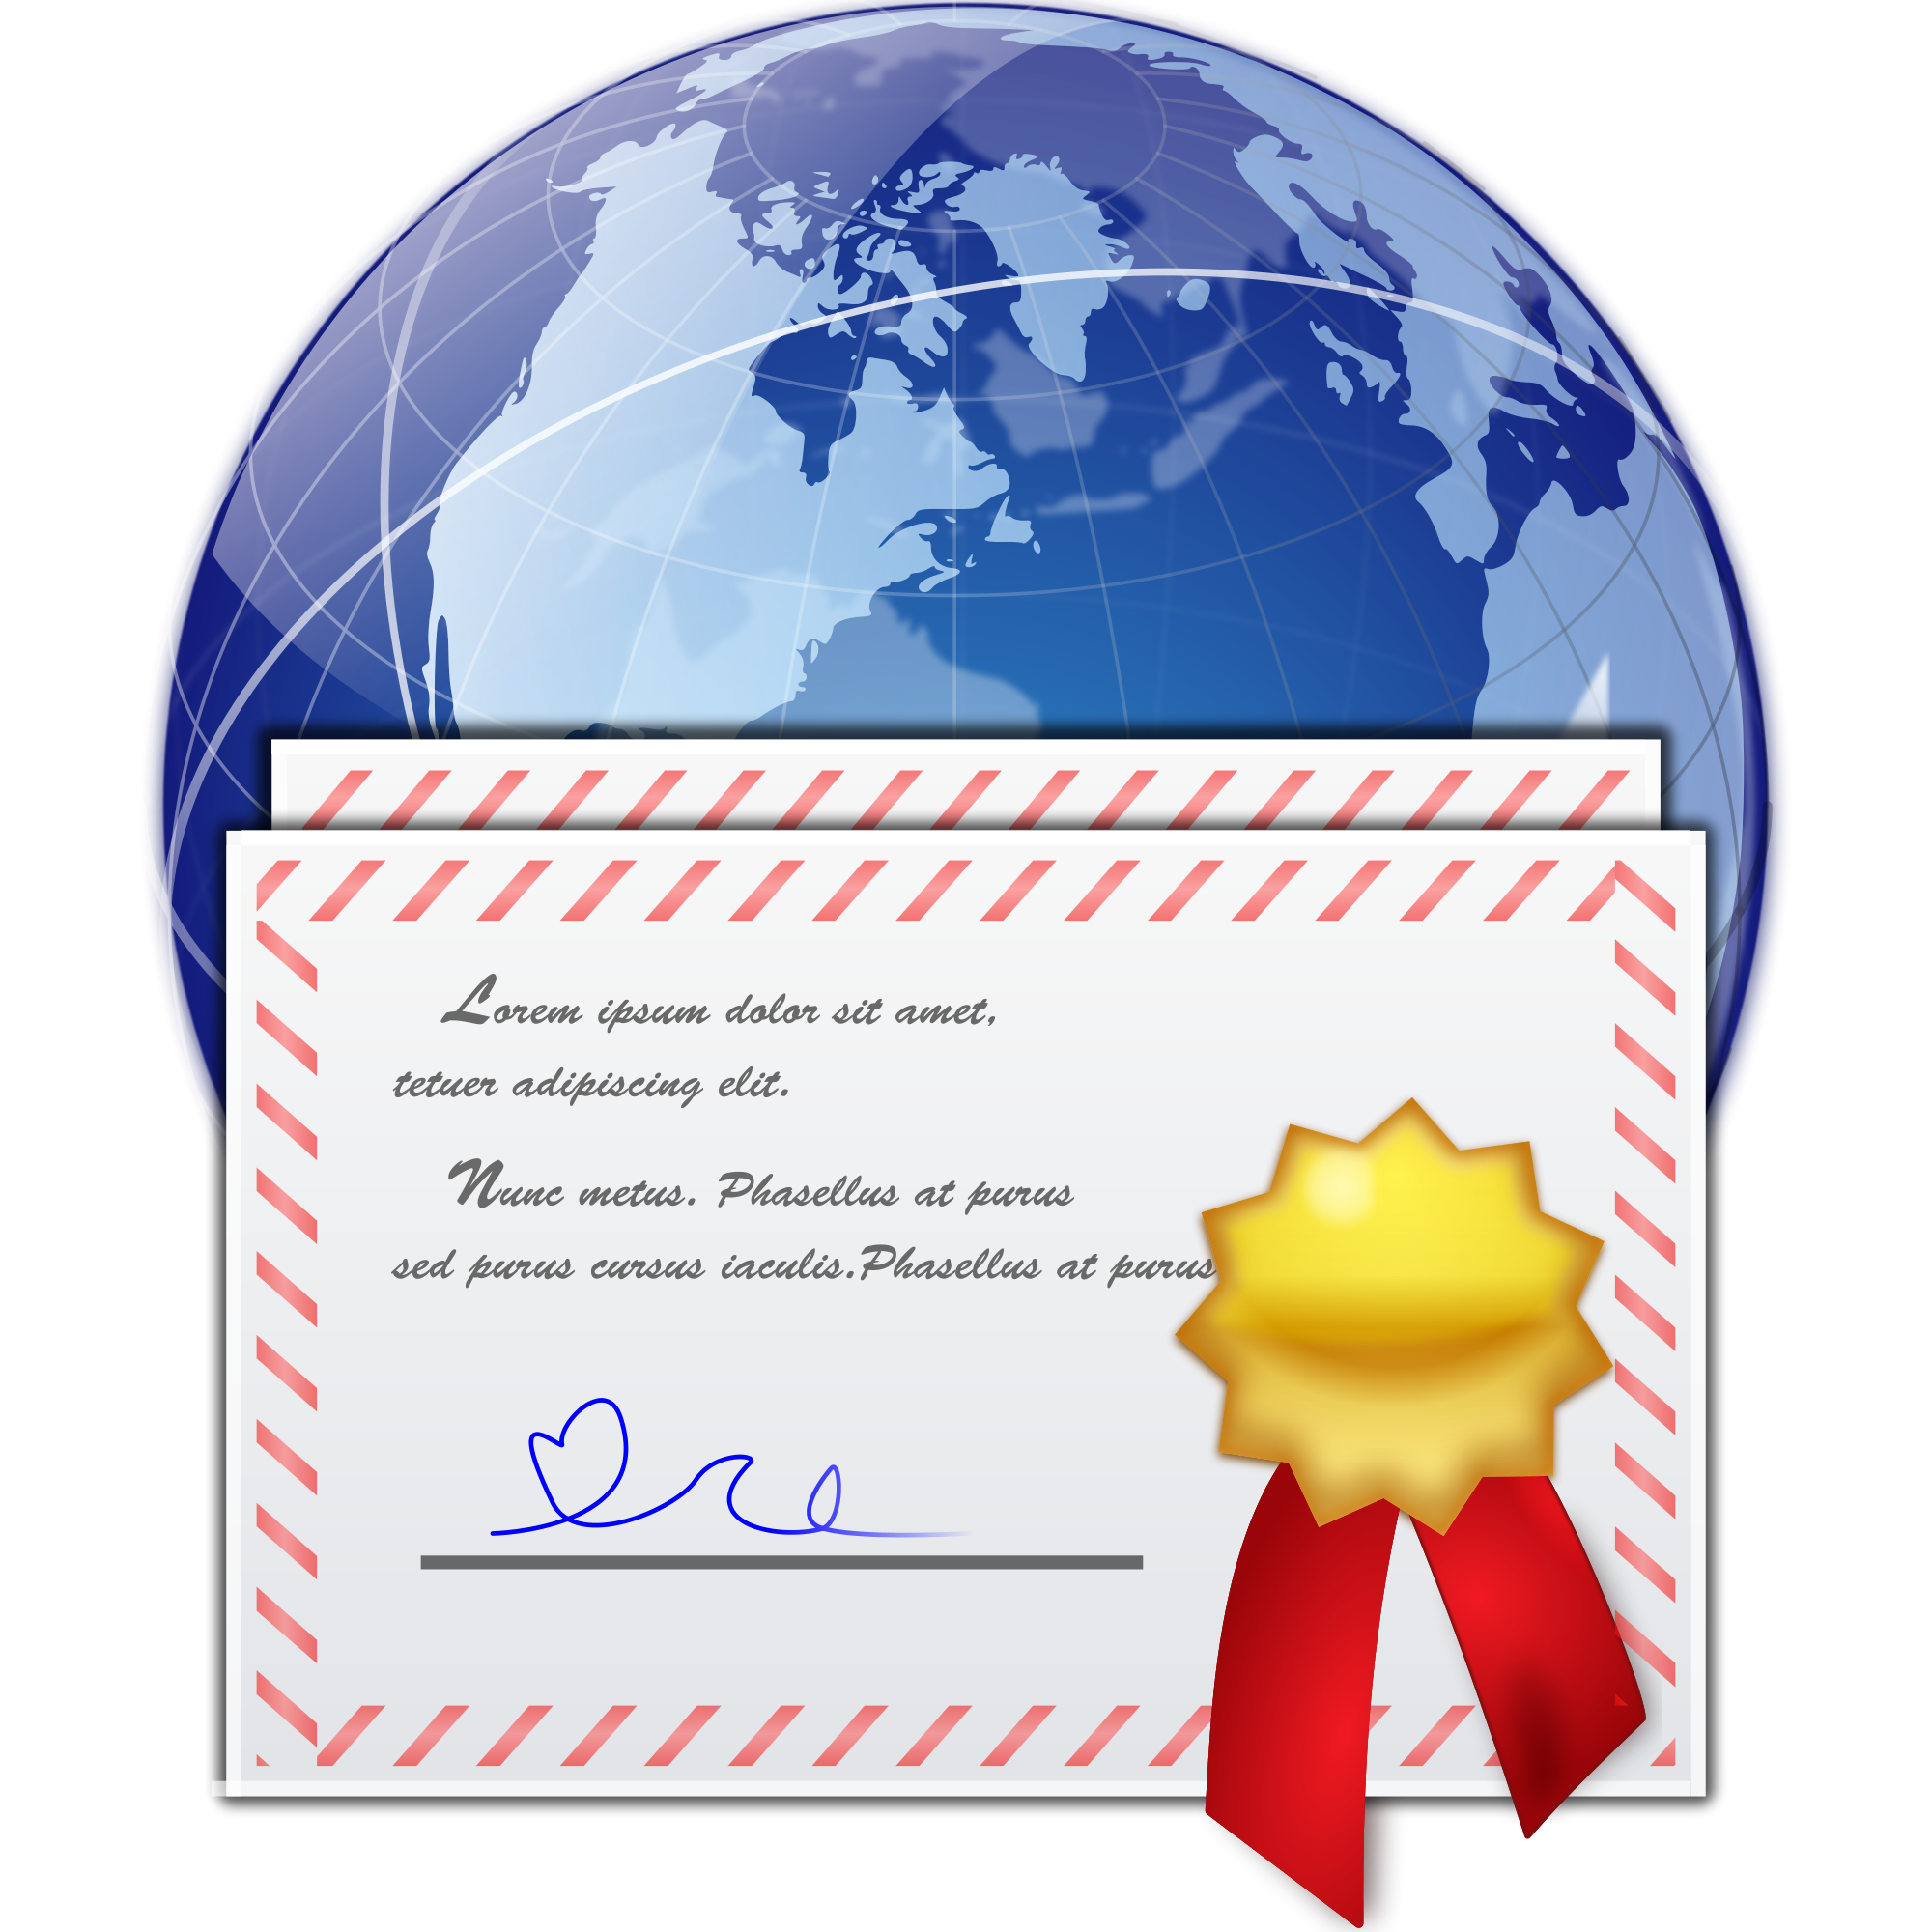 File:Oxygen480 places certificate server.svg Wikimedia Commons